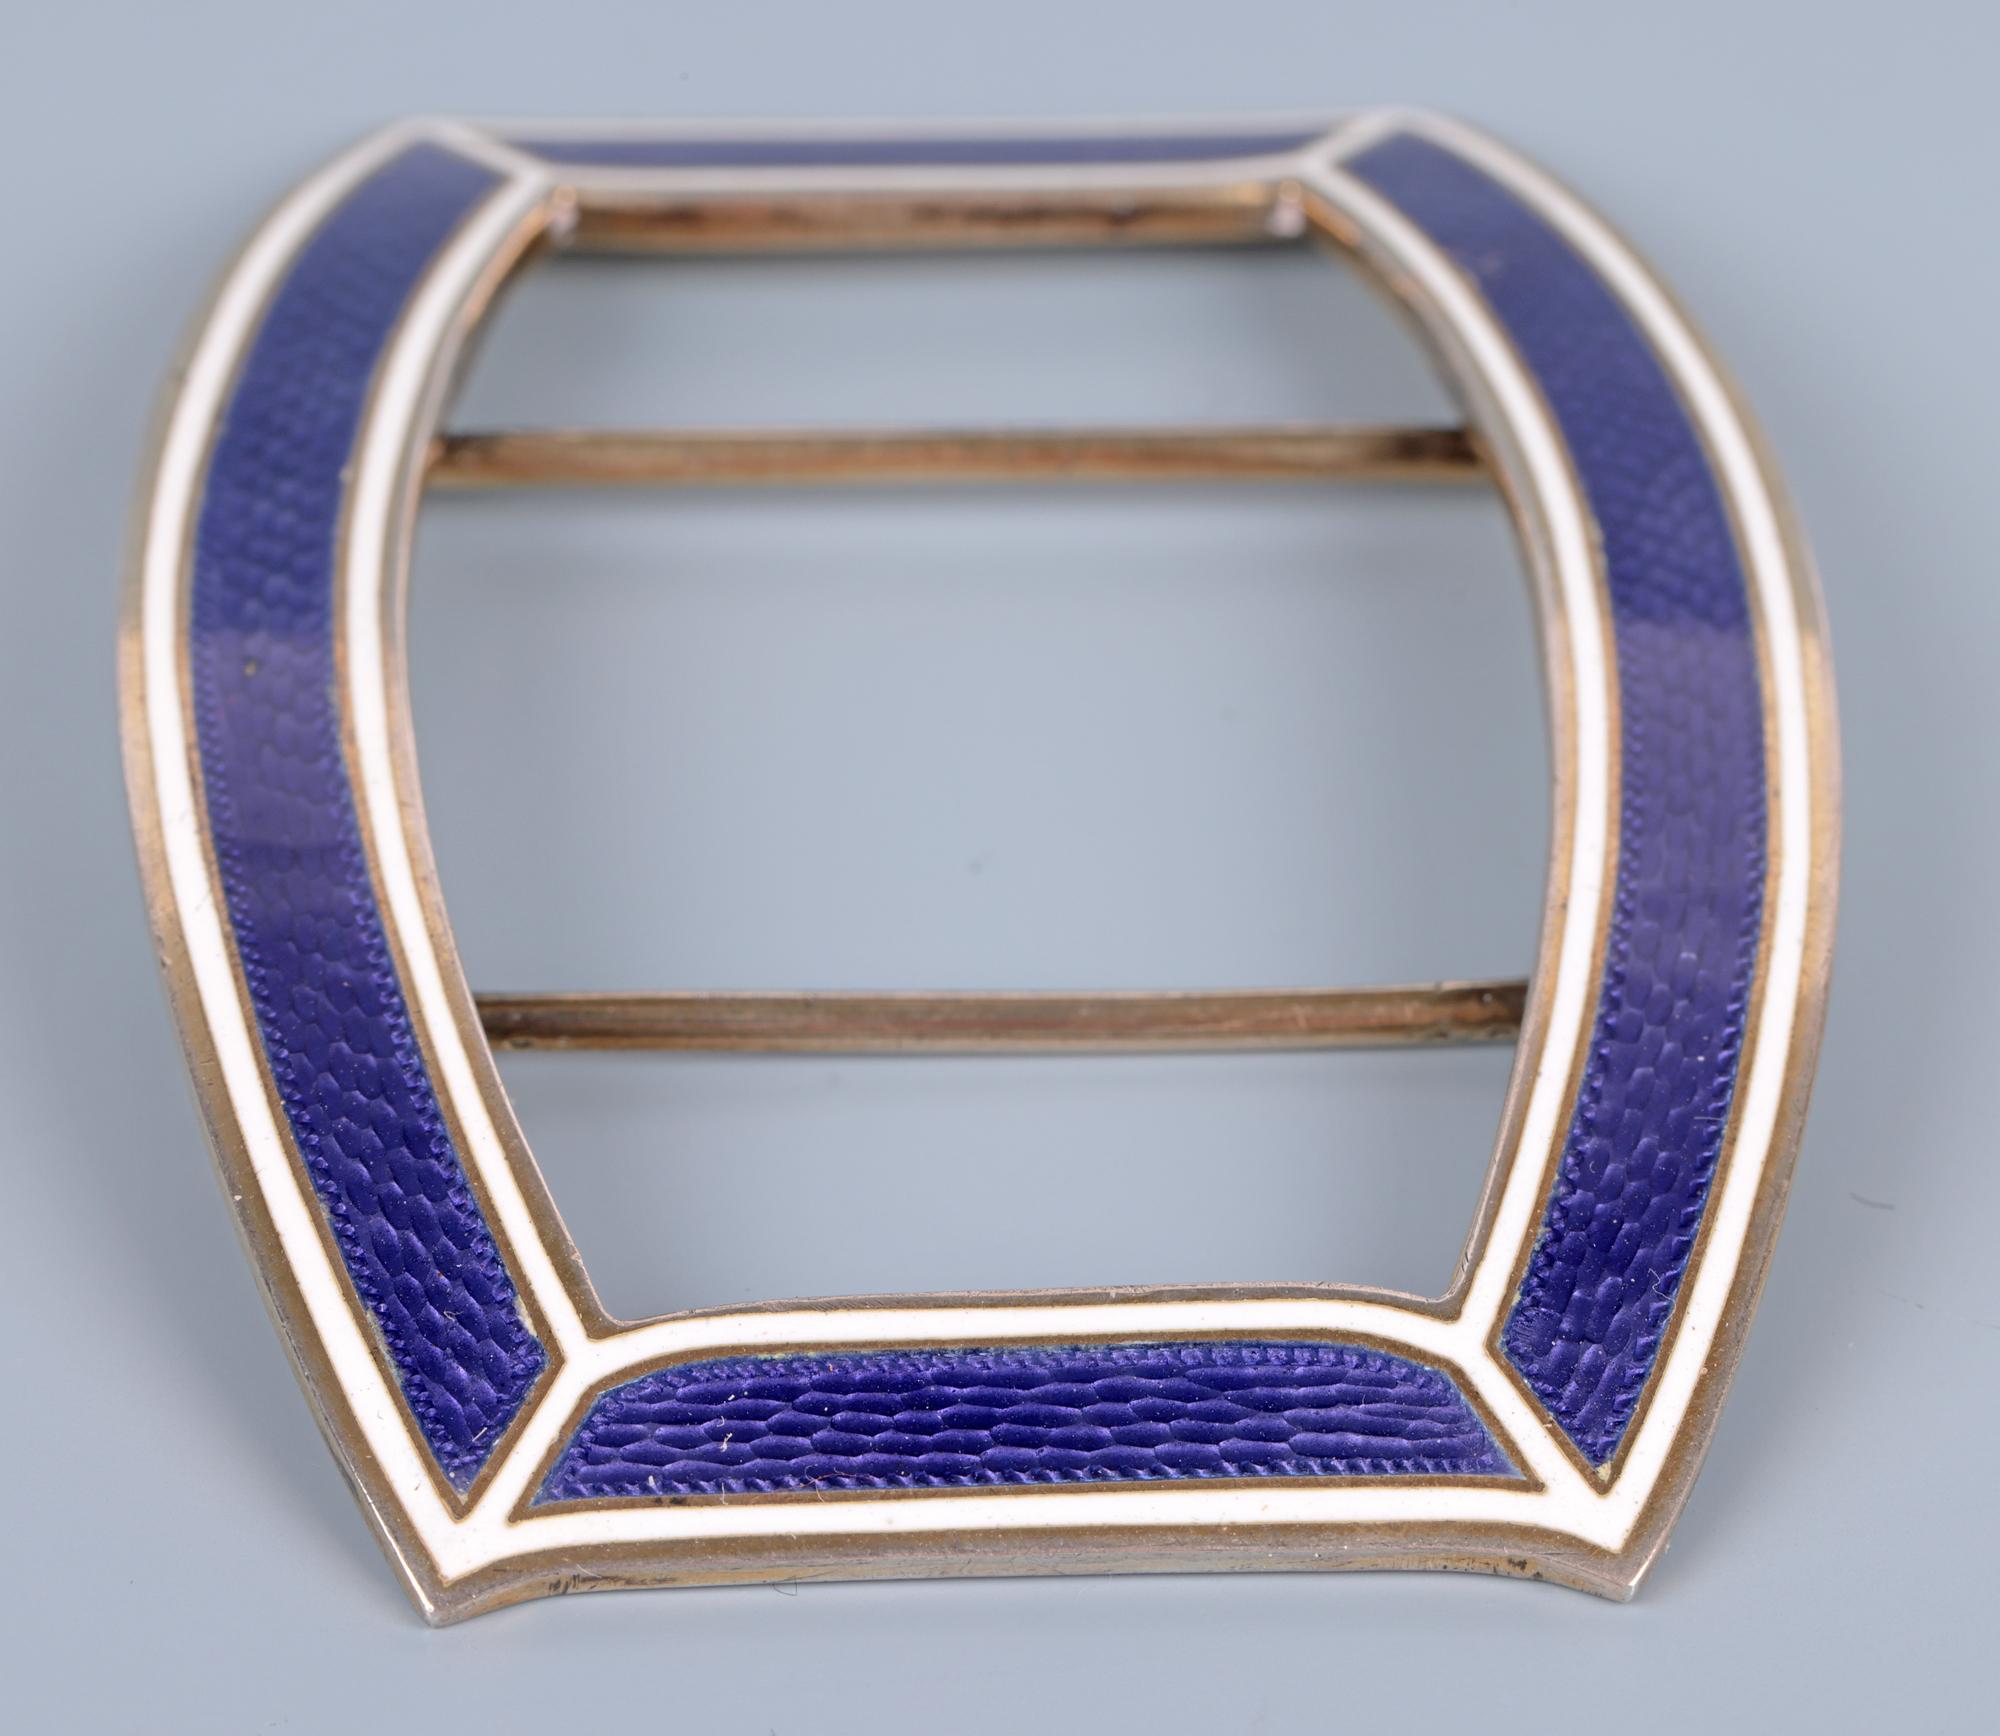 A very fine antique Austrian Viennese Secessionist silver guilloche enamel belt buckle by renowned silversmith Georg Anton Scheid (Austrian, 1838-1921) and dating from around 1900. The buckle is superbly made in heavy gauge silver with belt and hook